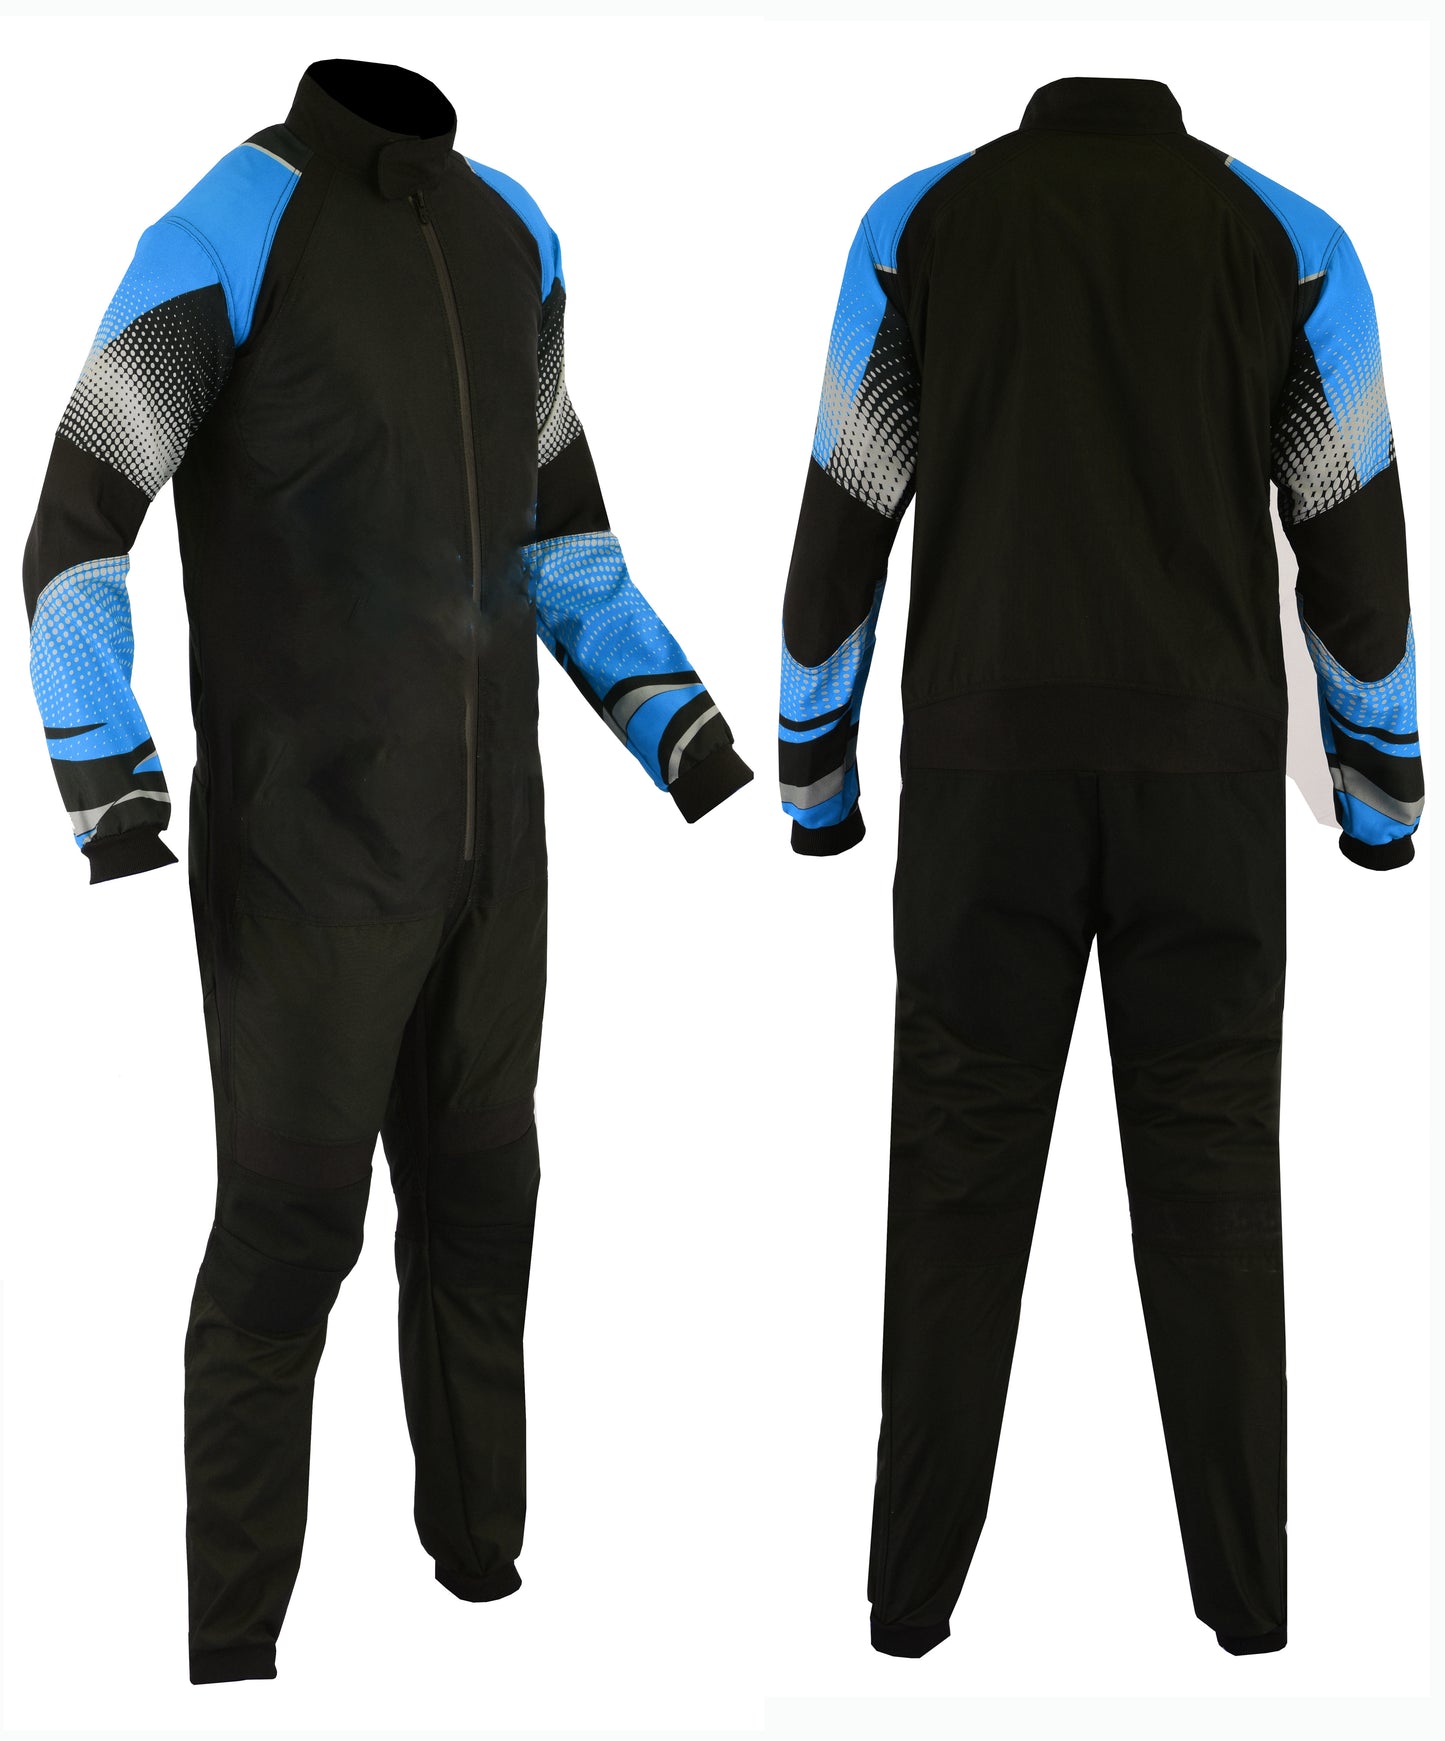 Latest Design Freefly Skydiving Sublimation Suit Sh-05